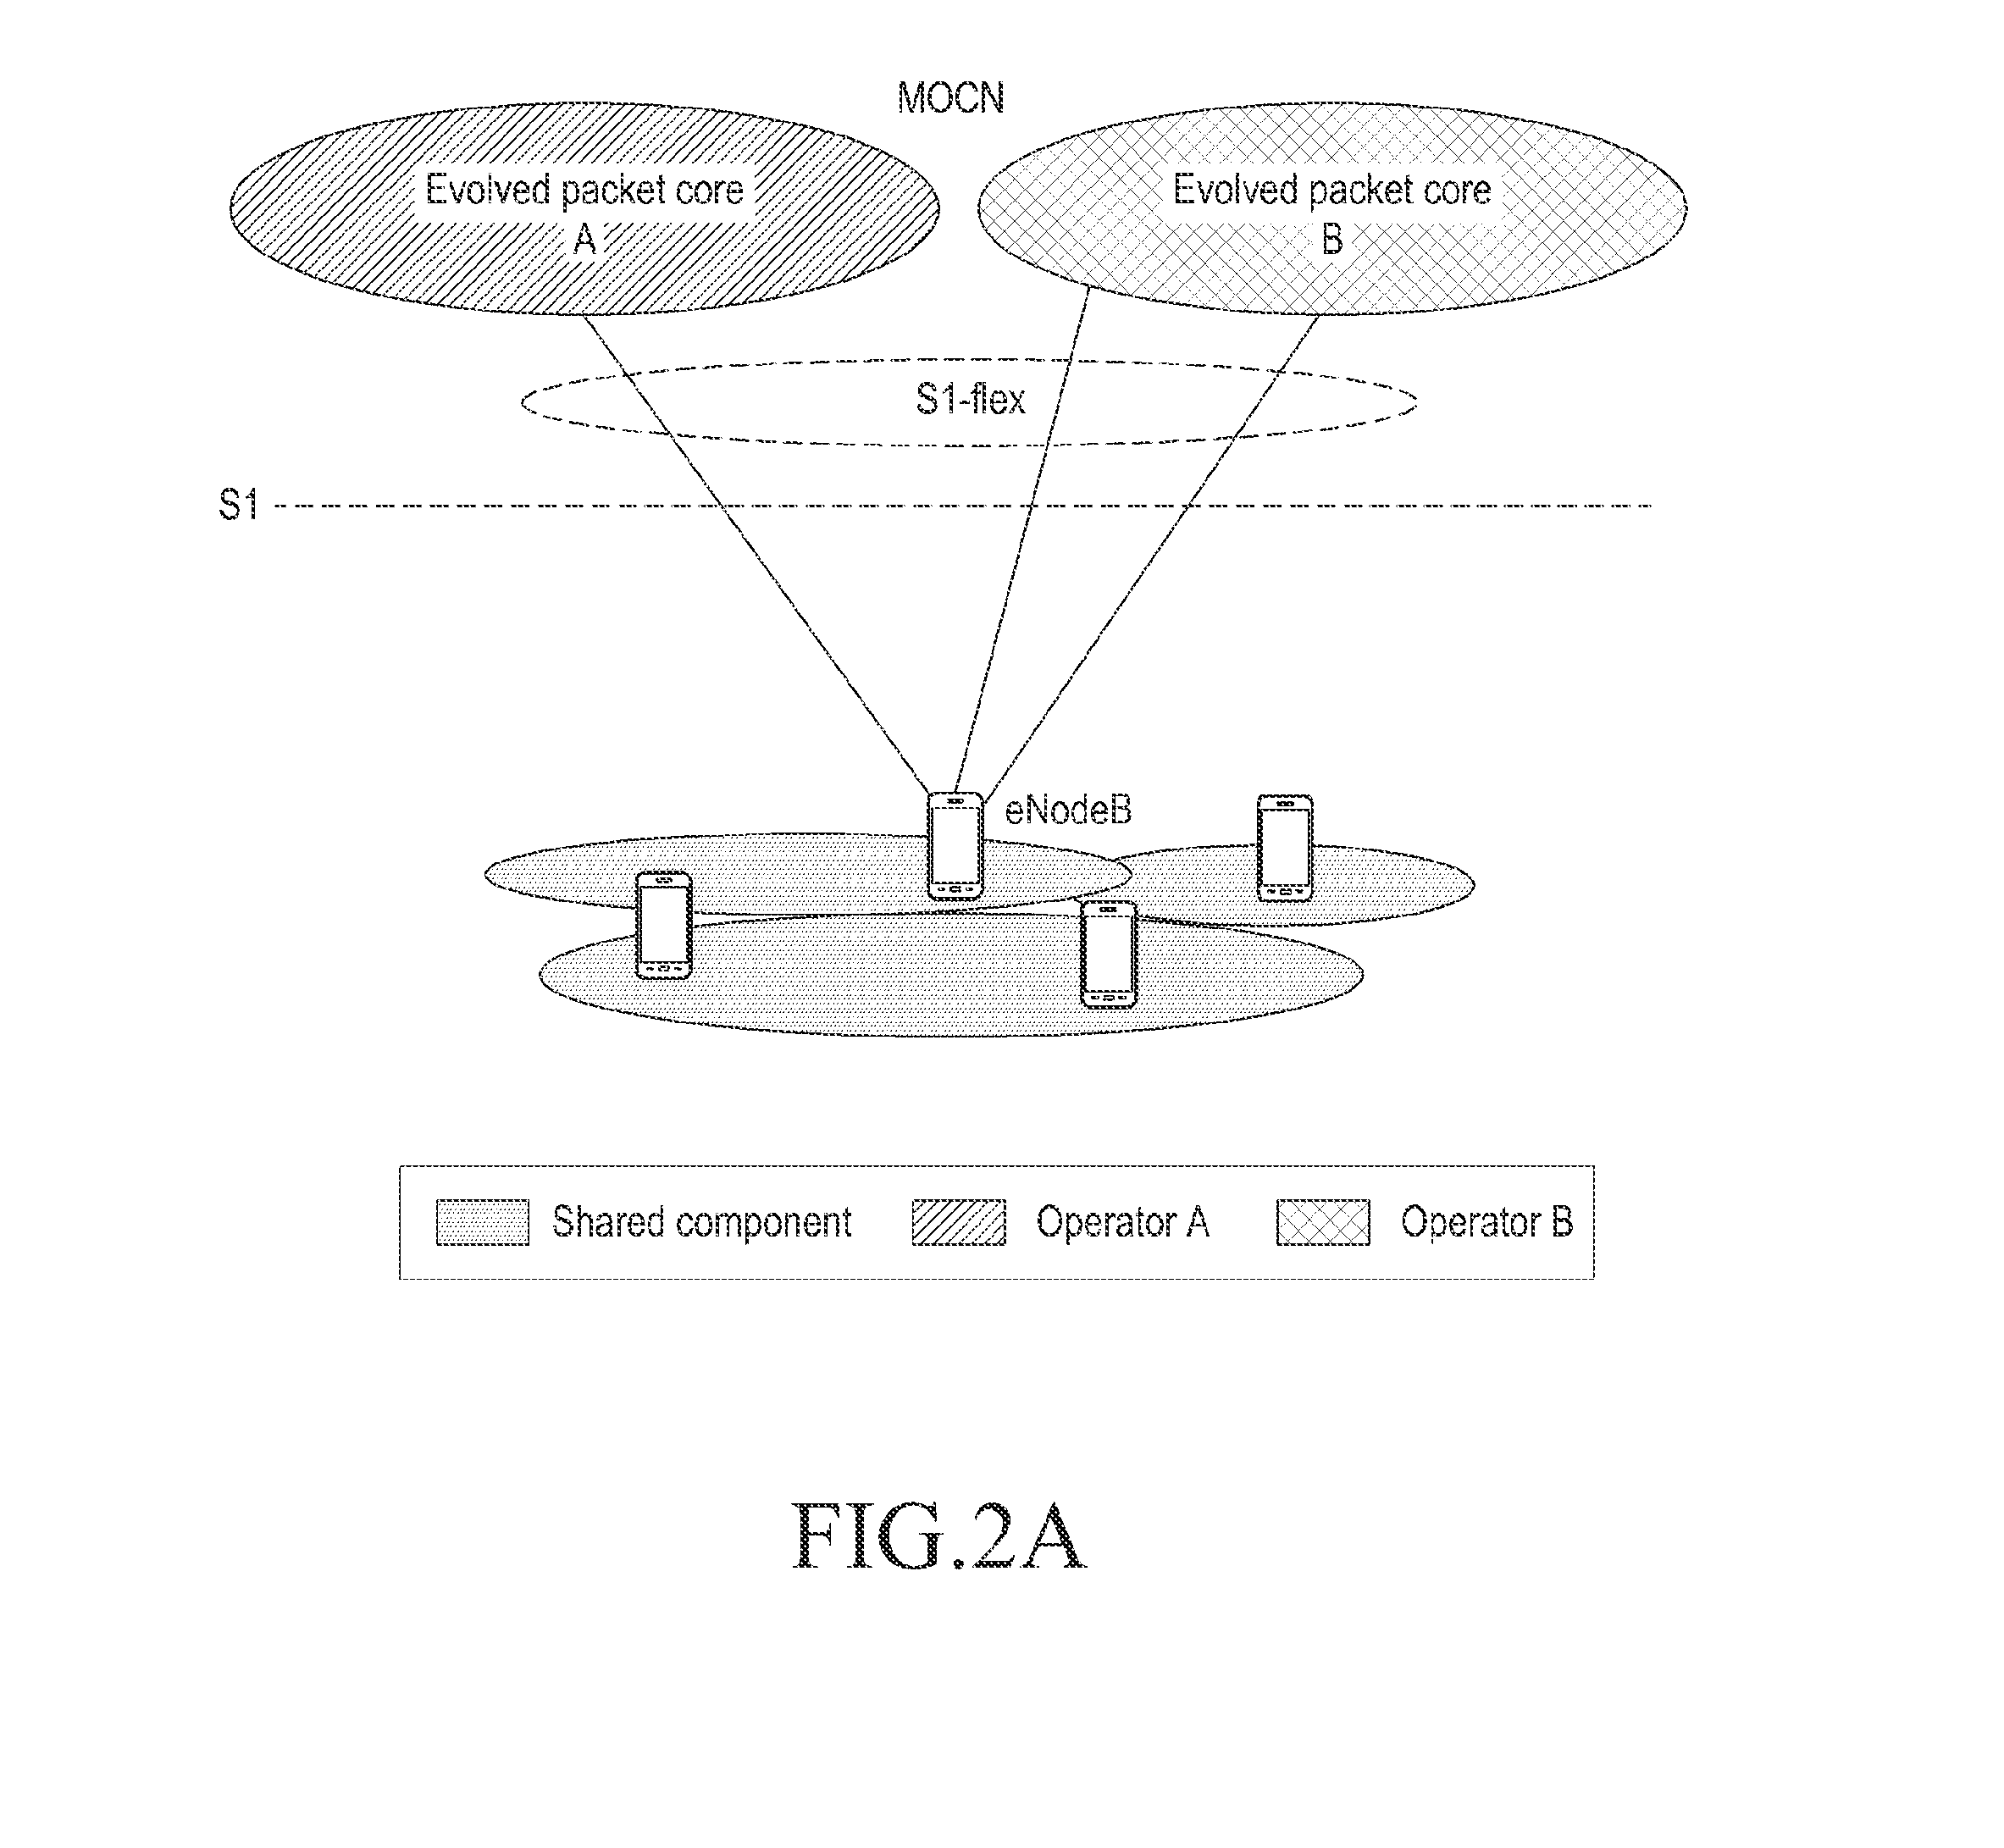 Sdn-based network sharing method and apparatus for supporting multiple operators